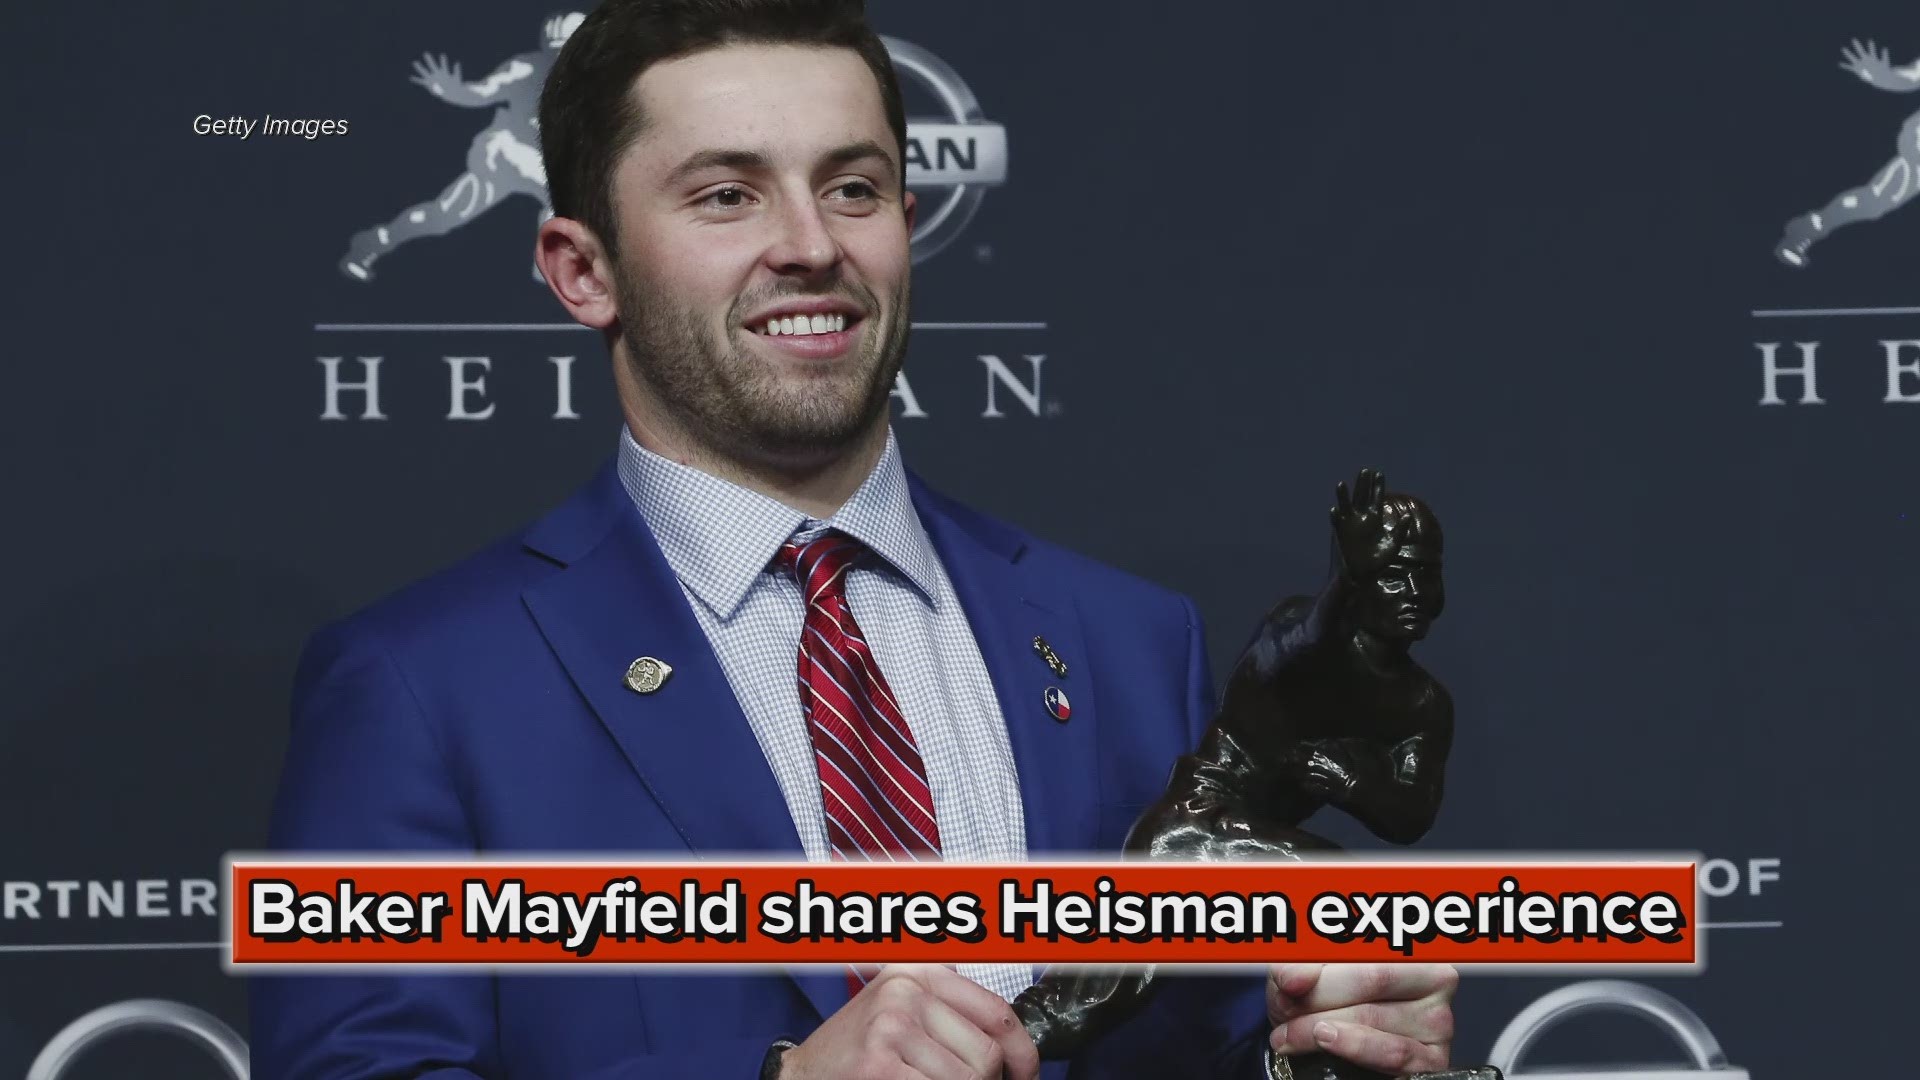 Cleveland Browns QB Baker Mayfield: It was a blessing to go through Heisman experience